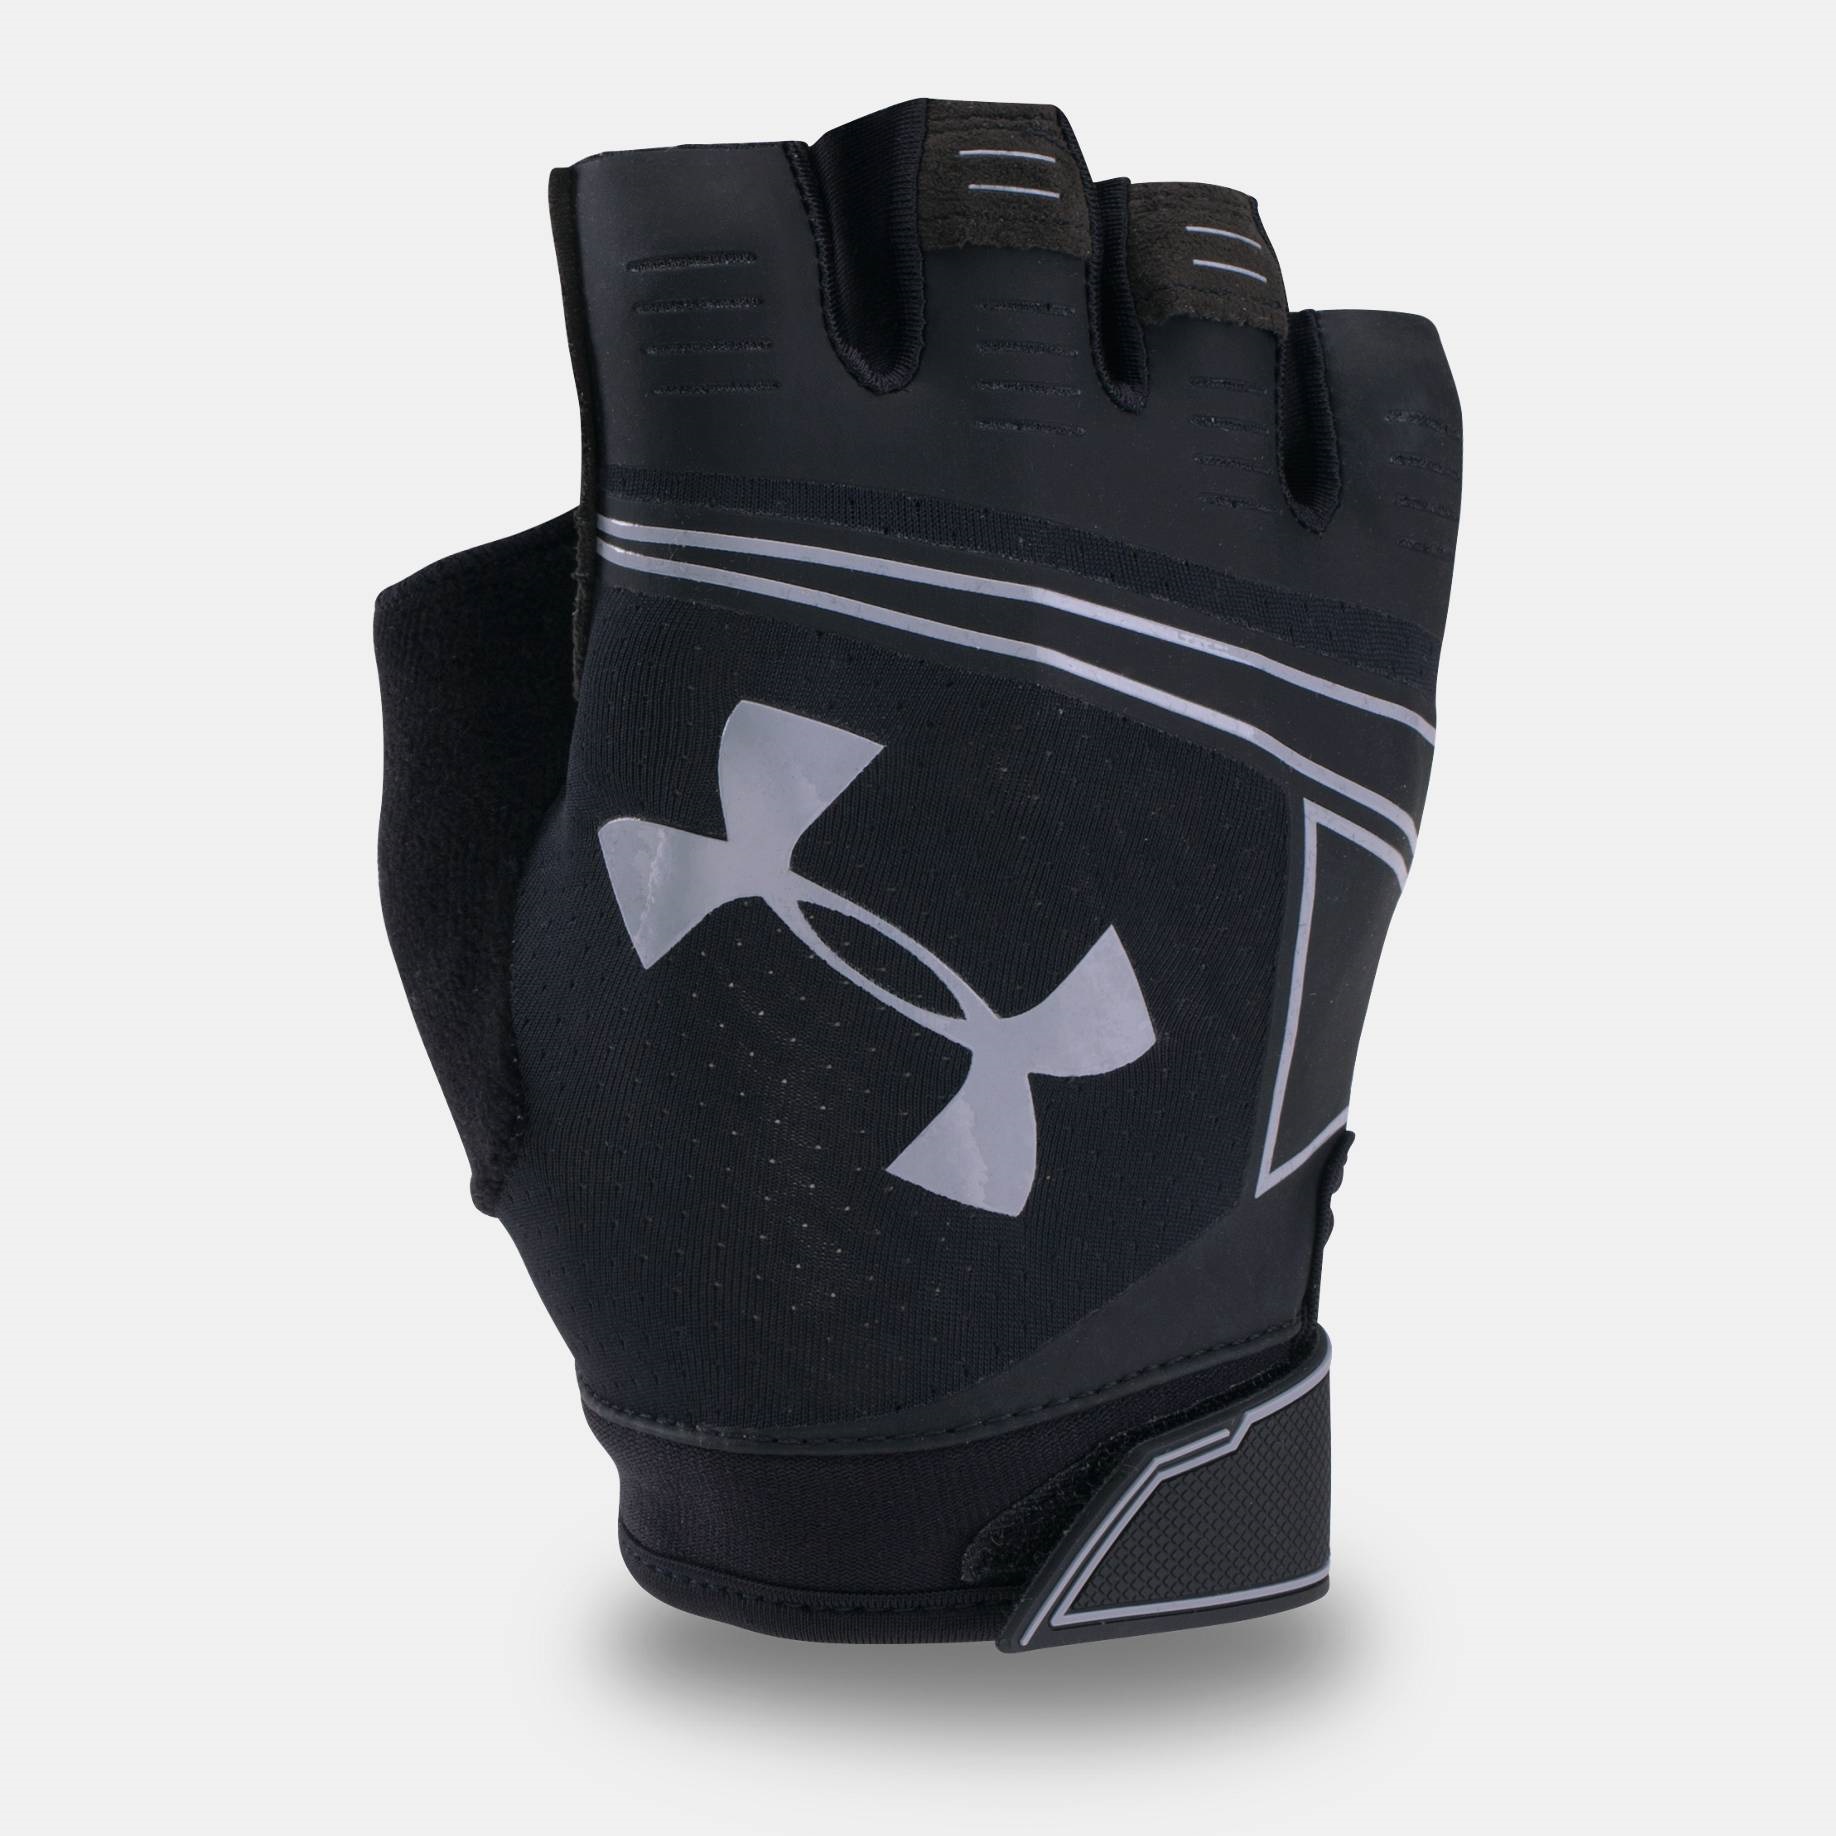 Ups compañerismo Continuar Gloves | Accessories | Under armour CoolSwitch Flux Glove 0823 | Fitness